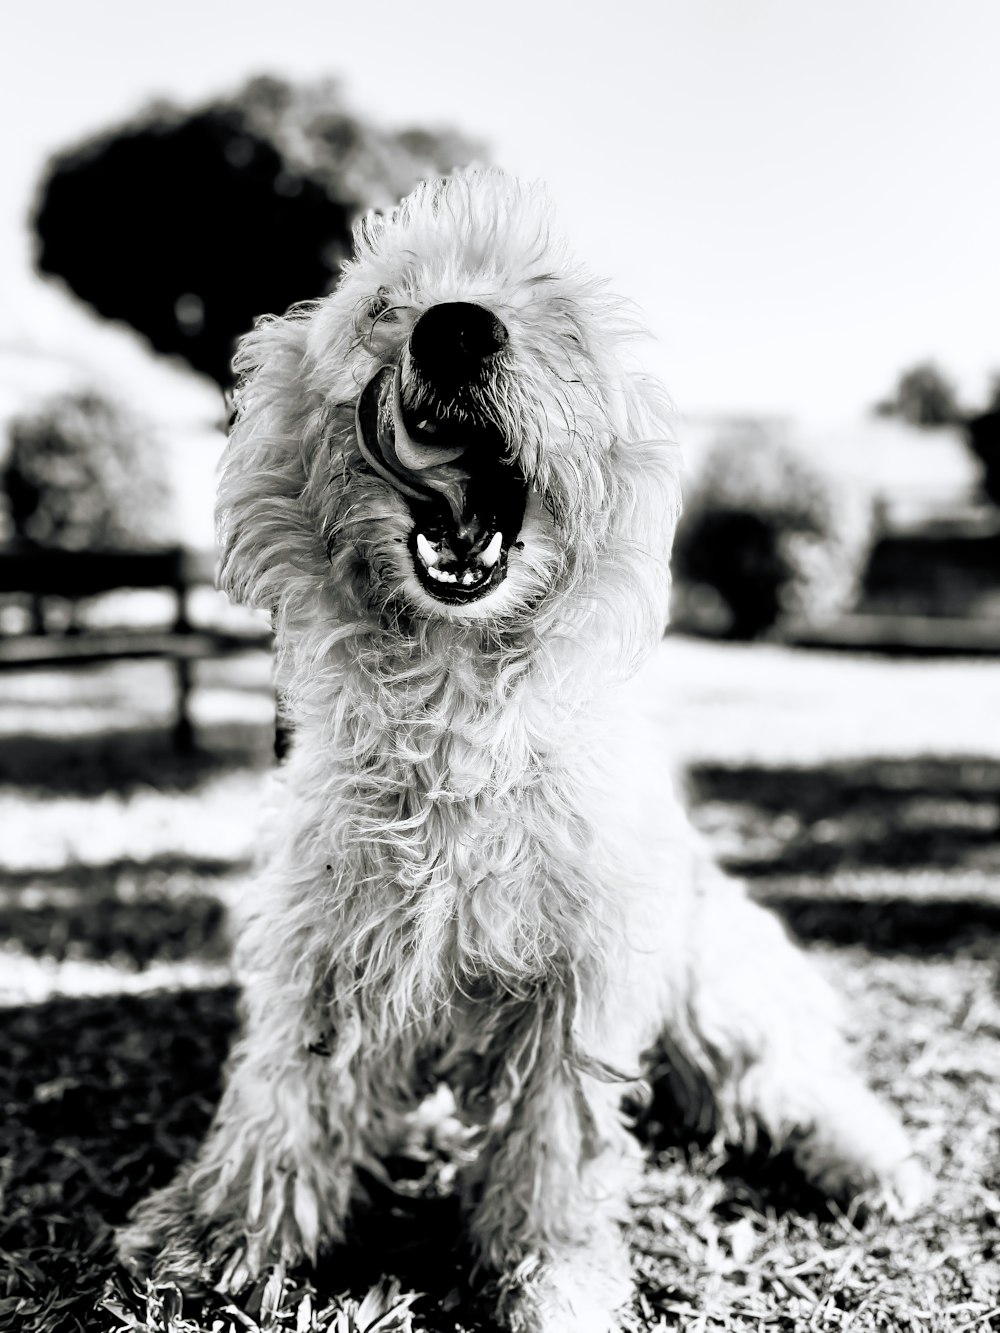 a shaggy dog with a ball in its mouth